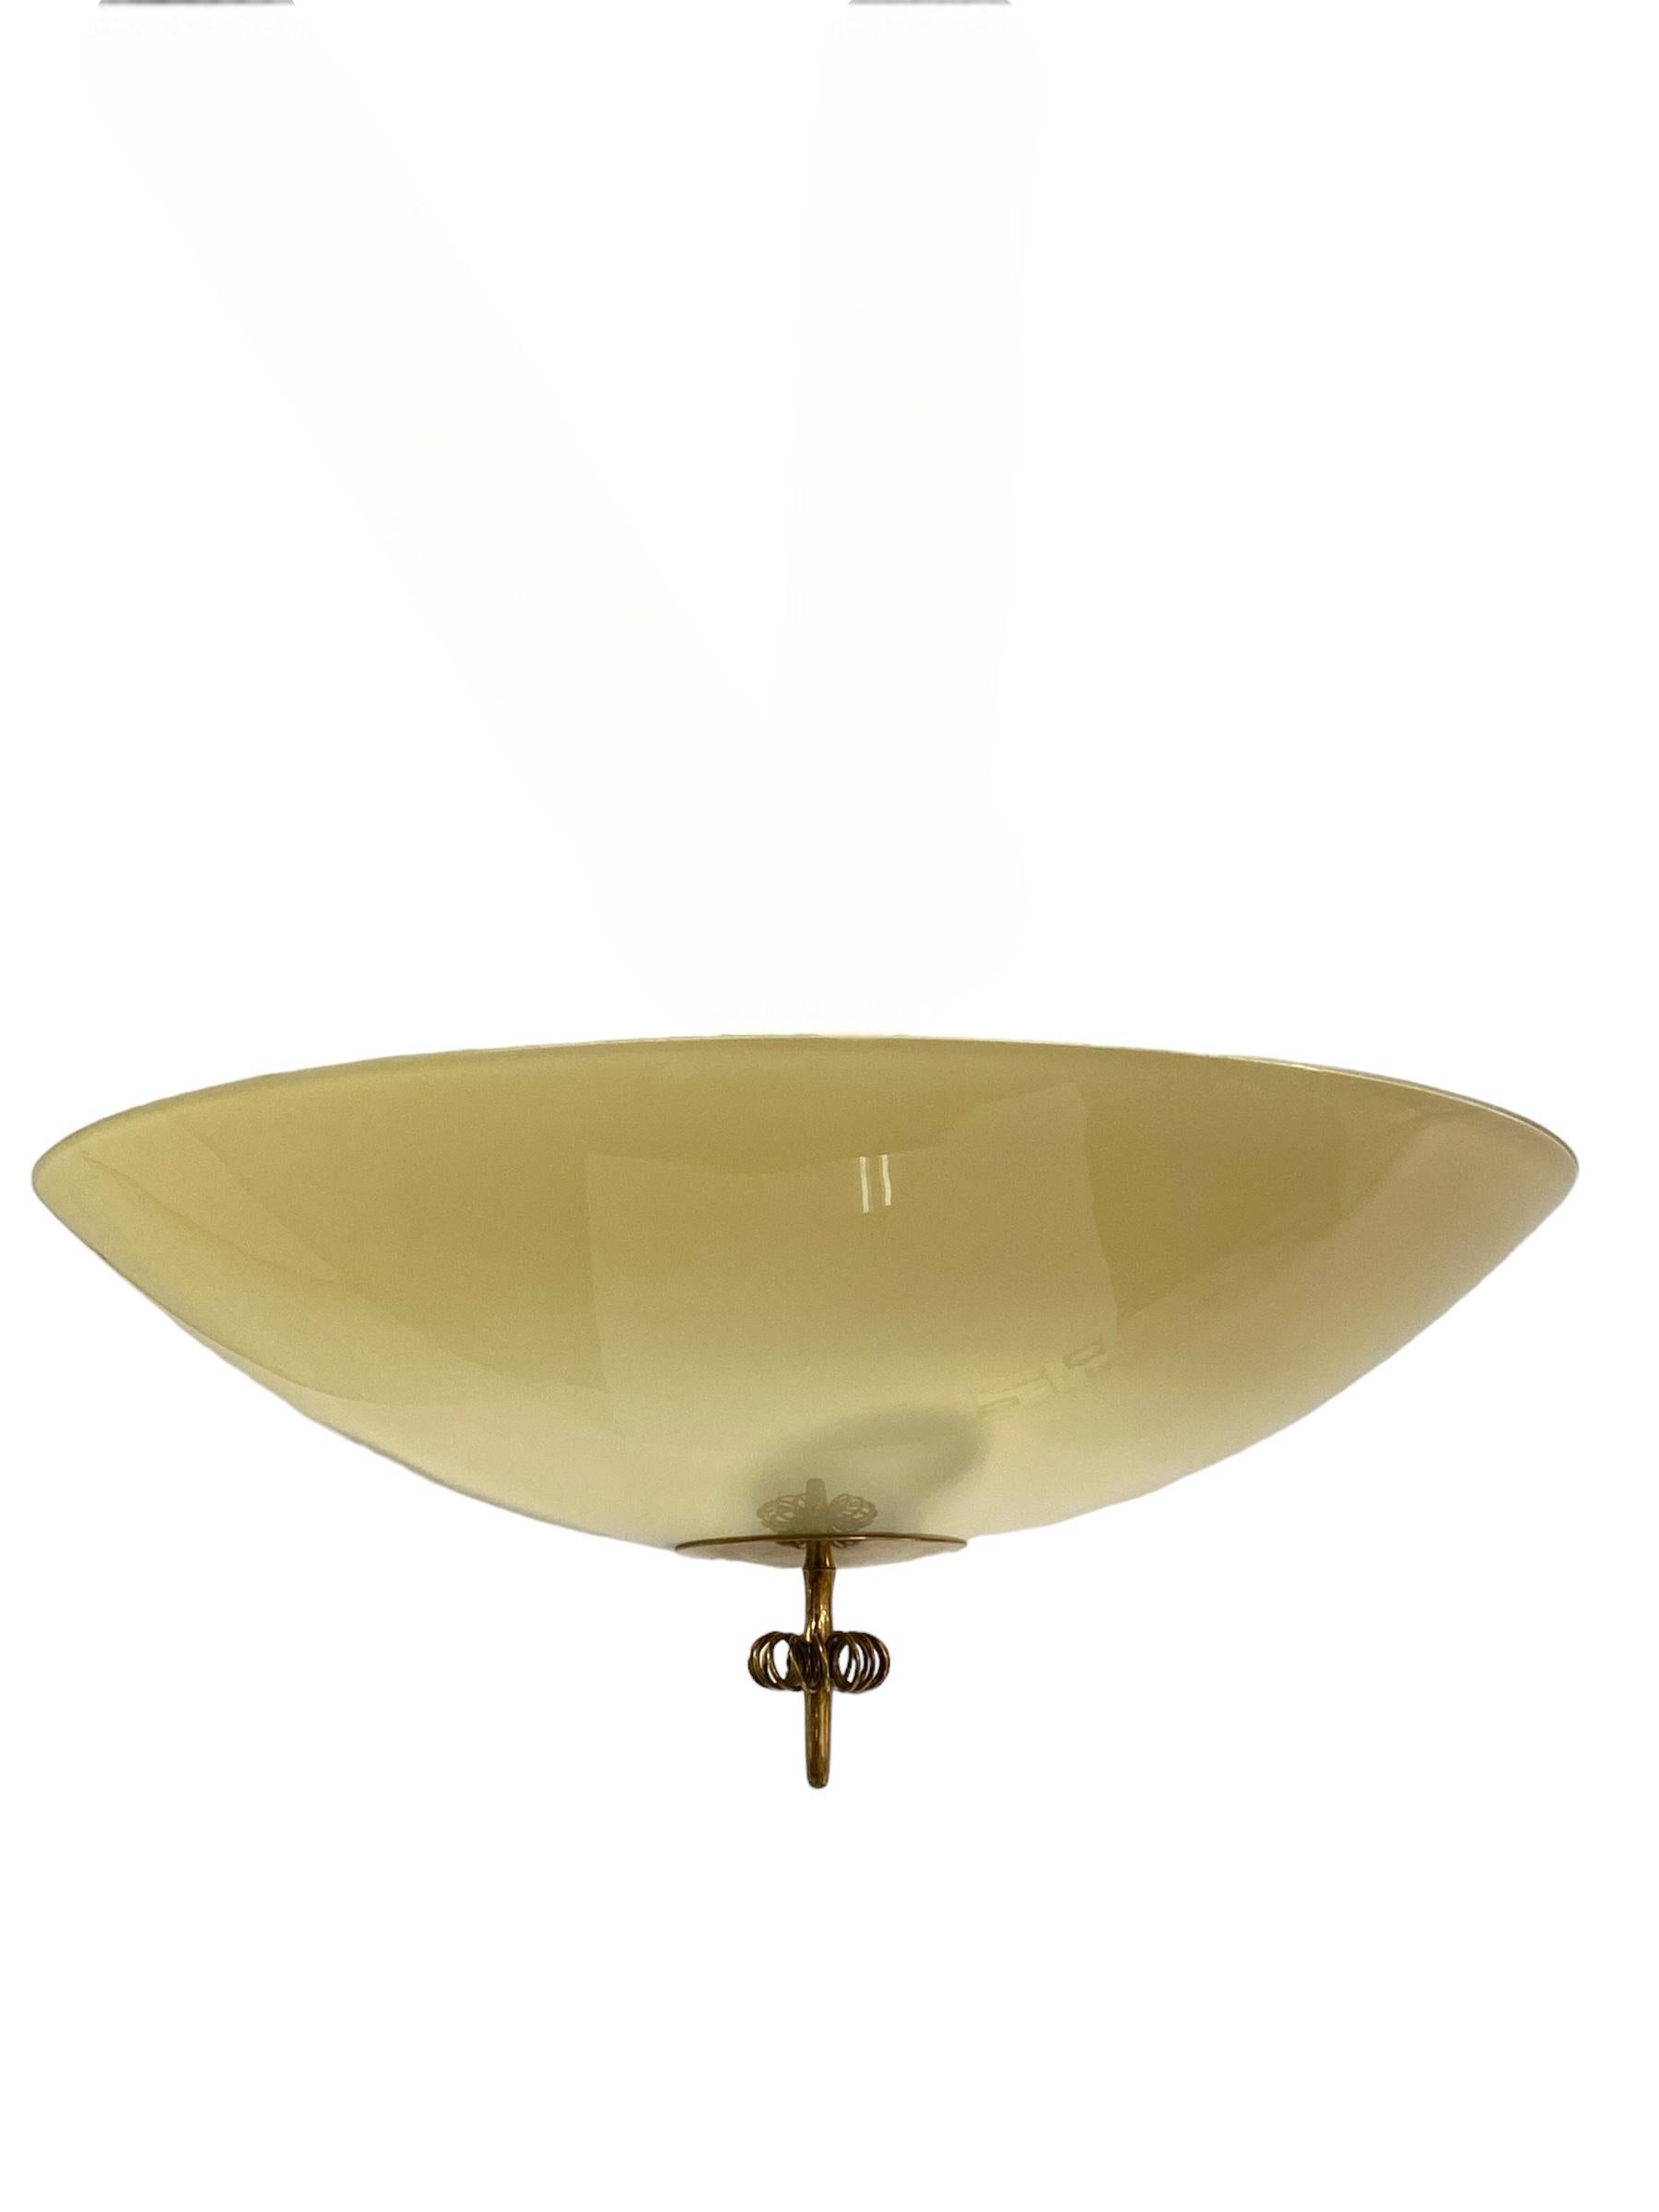 Paavo Tynell Ceiling Lamp/Flush Mount  Model Number 1088 For Idman, 1950s In Good Condition For Sale In Helsinki, FI